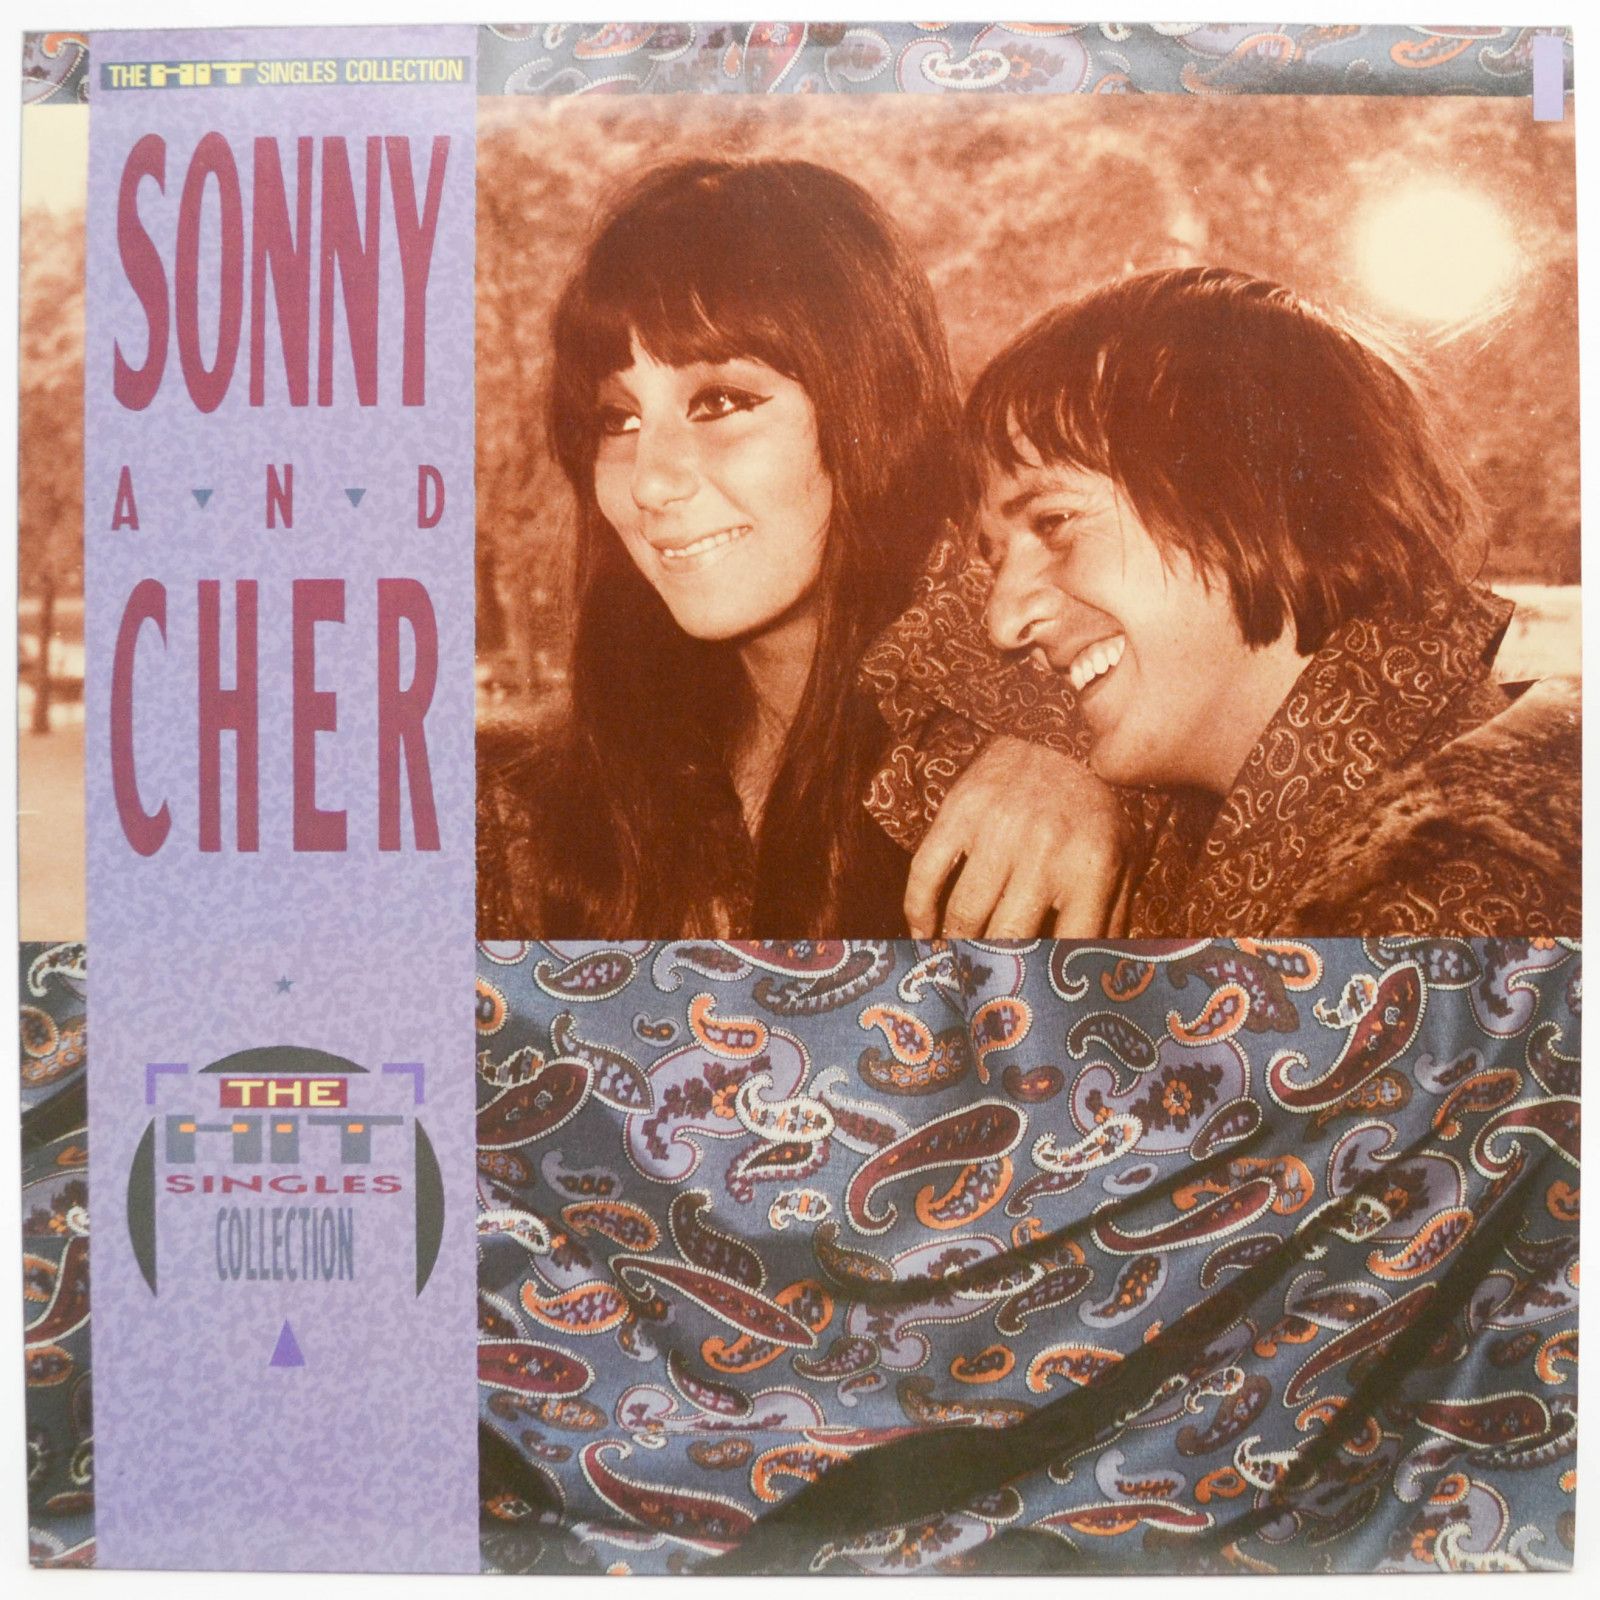 Sonny And Cher — The Hit Singles Collection, 1989